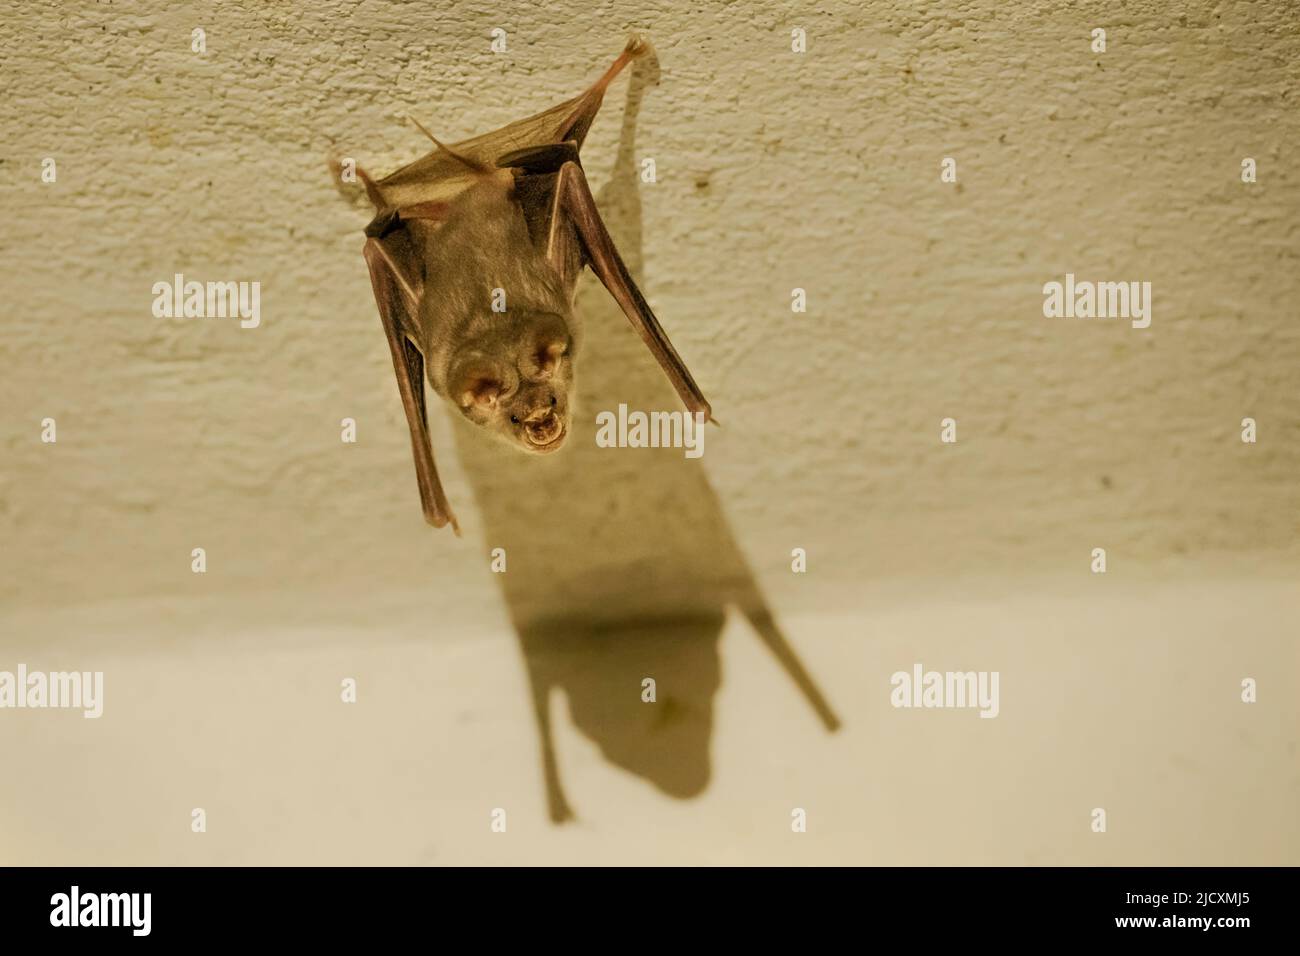 The trident bat or trident leaf-nosed bat (Asellia tridens) is a species of bat in the family Hipposideridae. It is widely distributed in the Middle E Stock Photo